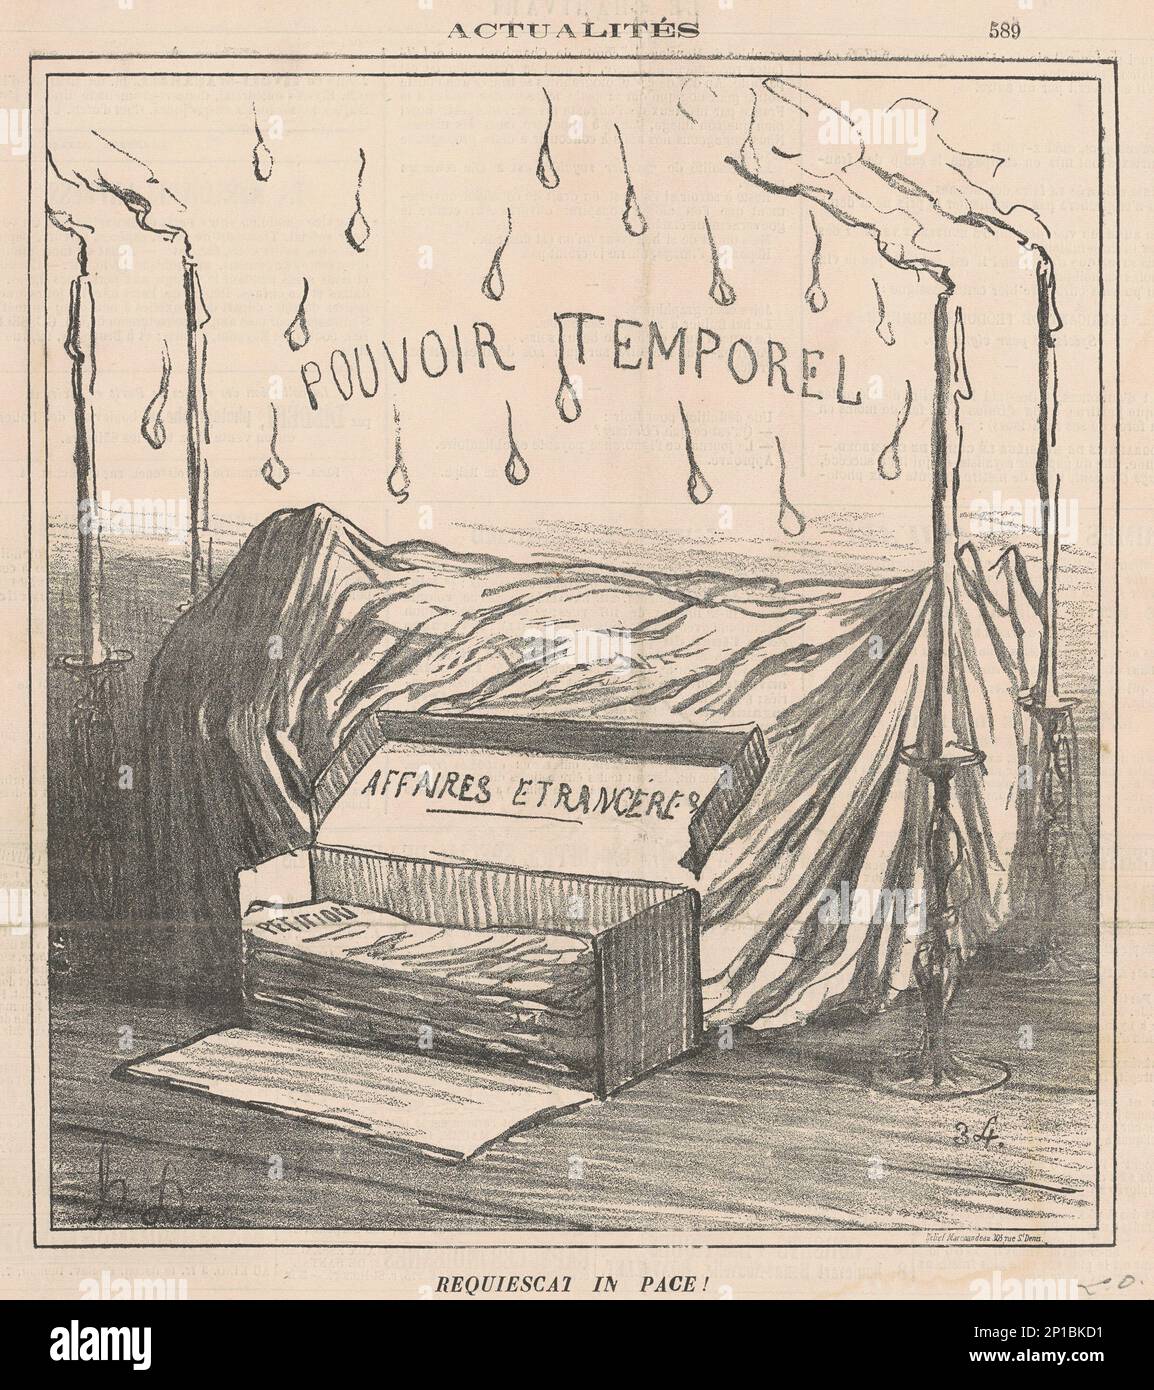 Requiescat in pace!, 19th century. Body lying under a sheet surrounded by candles. Temporal Power - Foreign Affairs - Petitions - Rest in Peace! Stock Photo